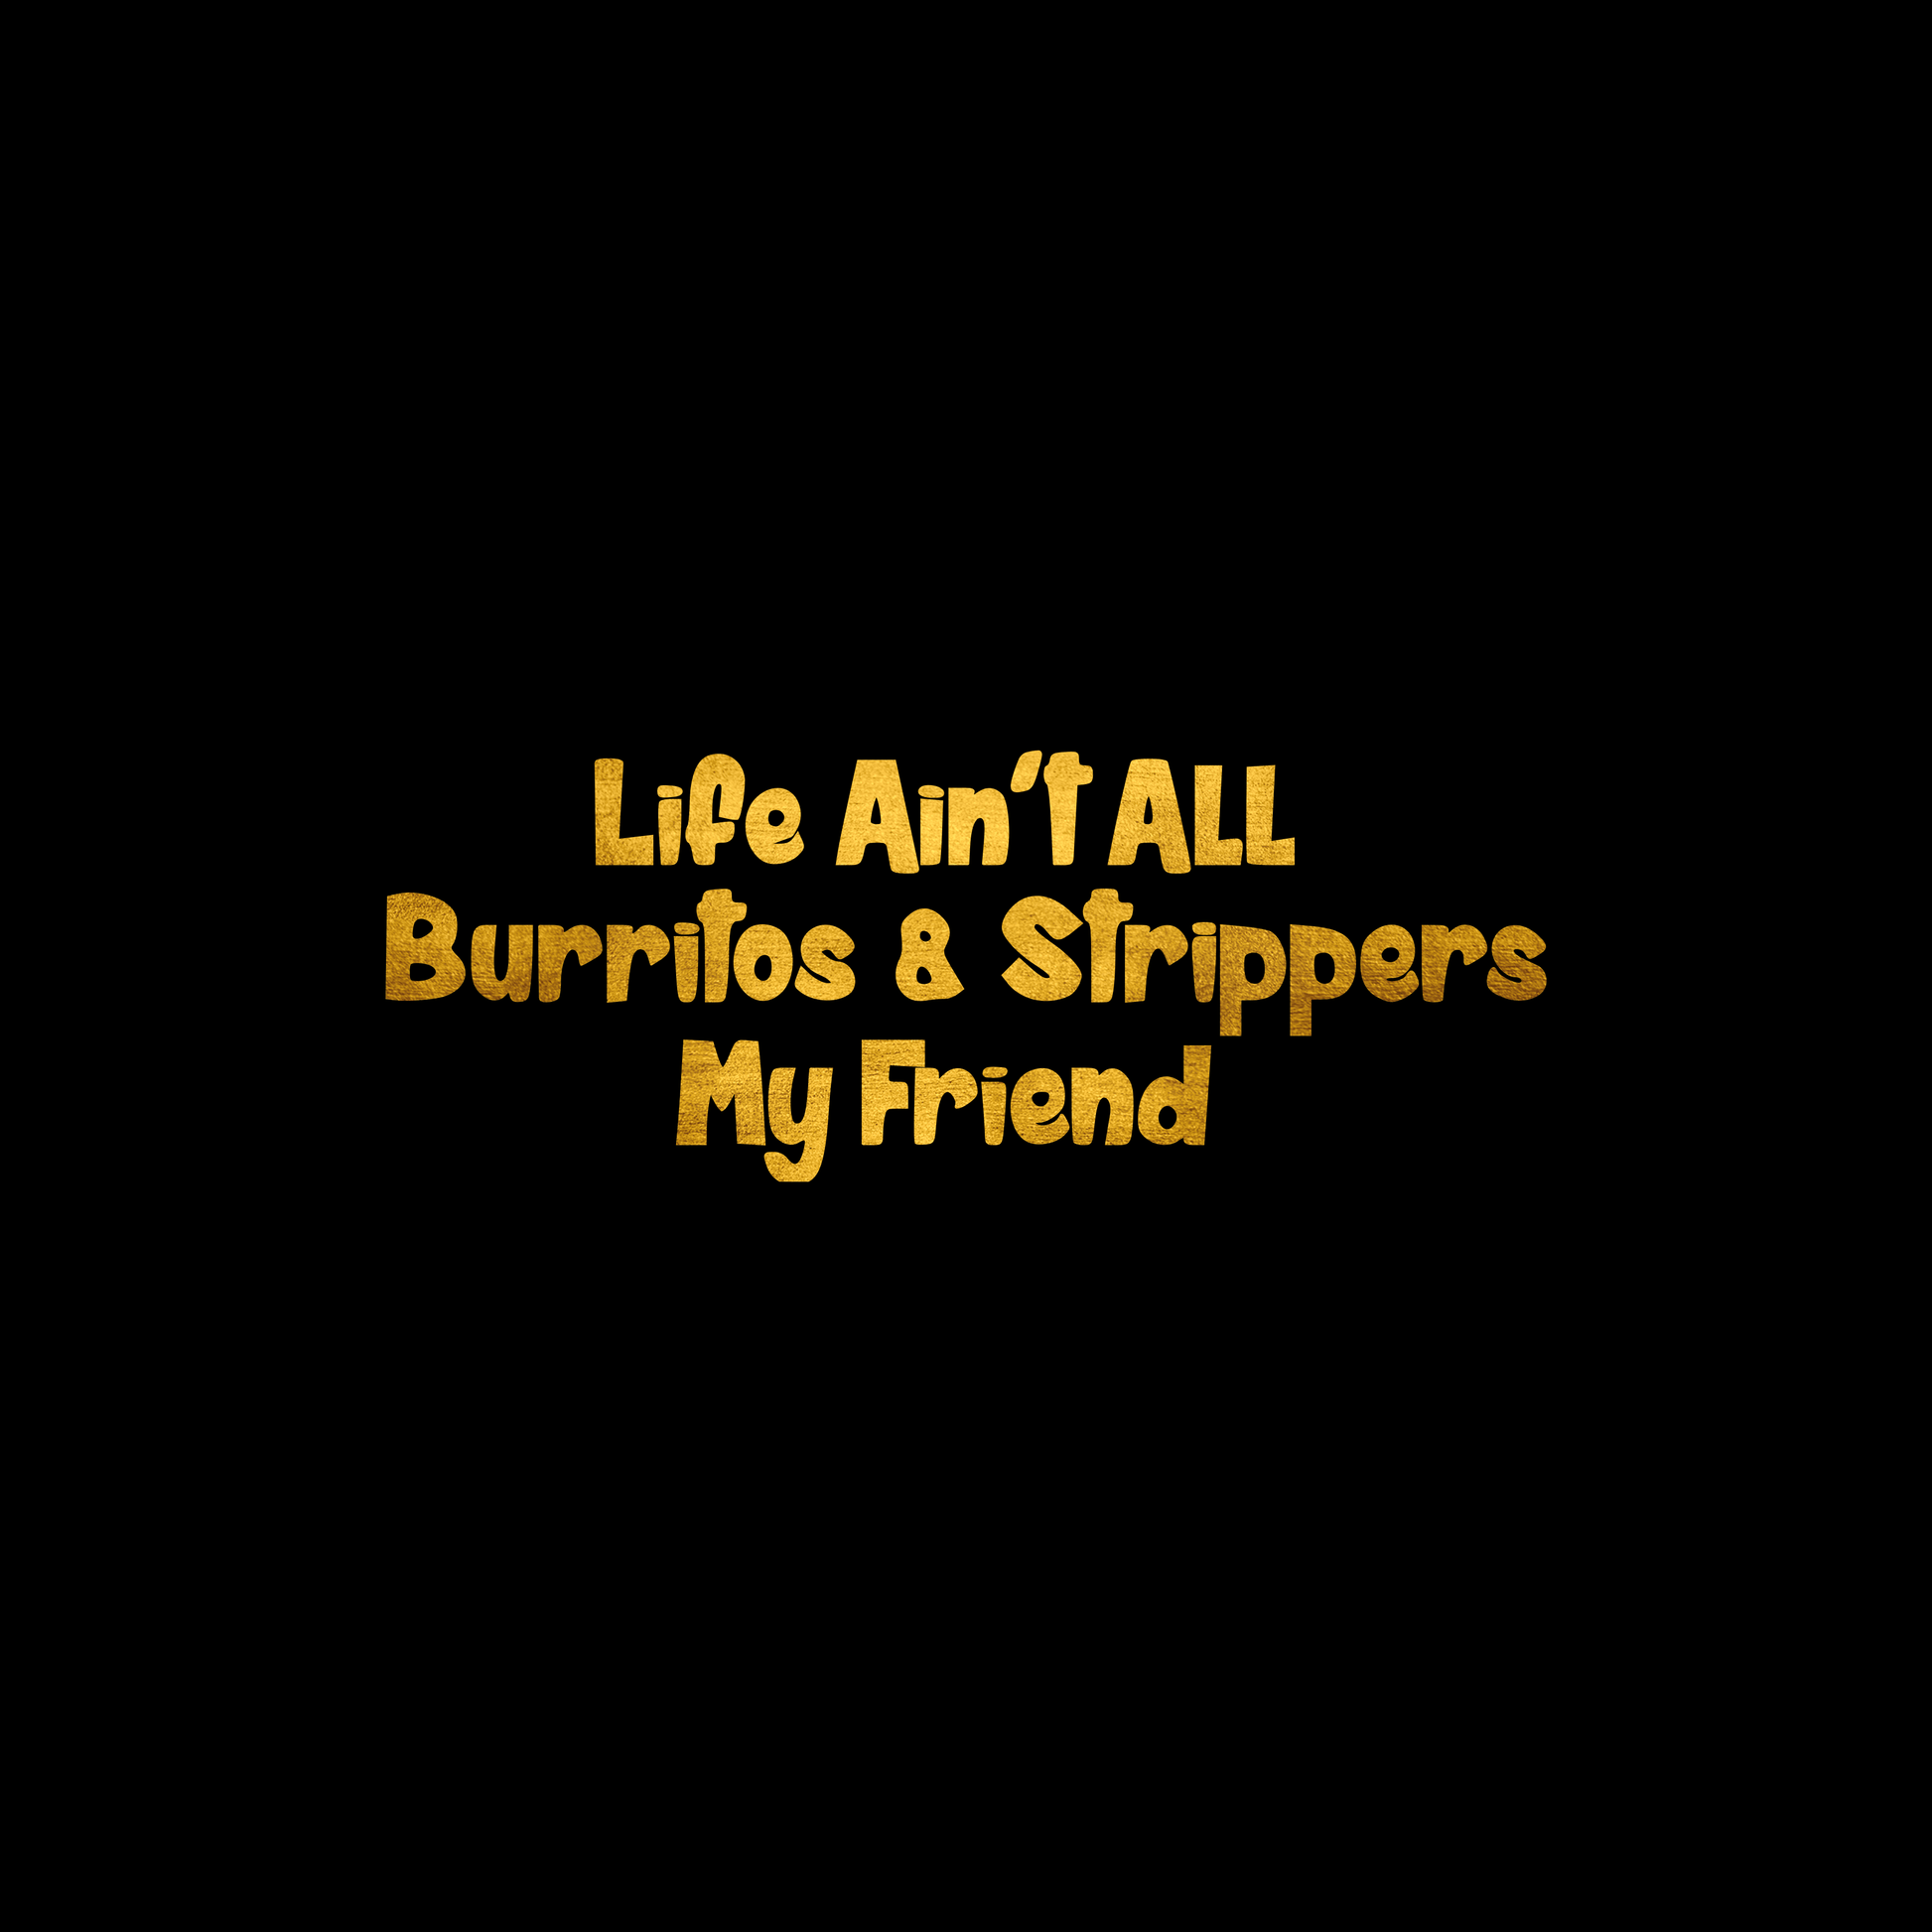 Life ain't all burritos and strippers my friends ticker decal